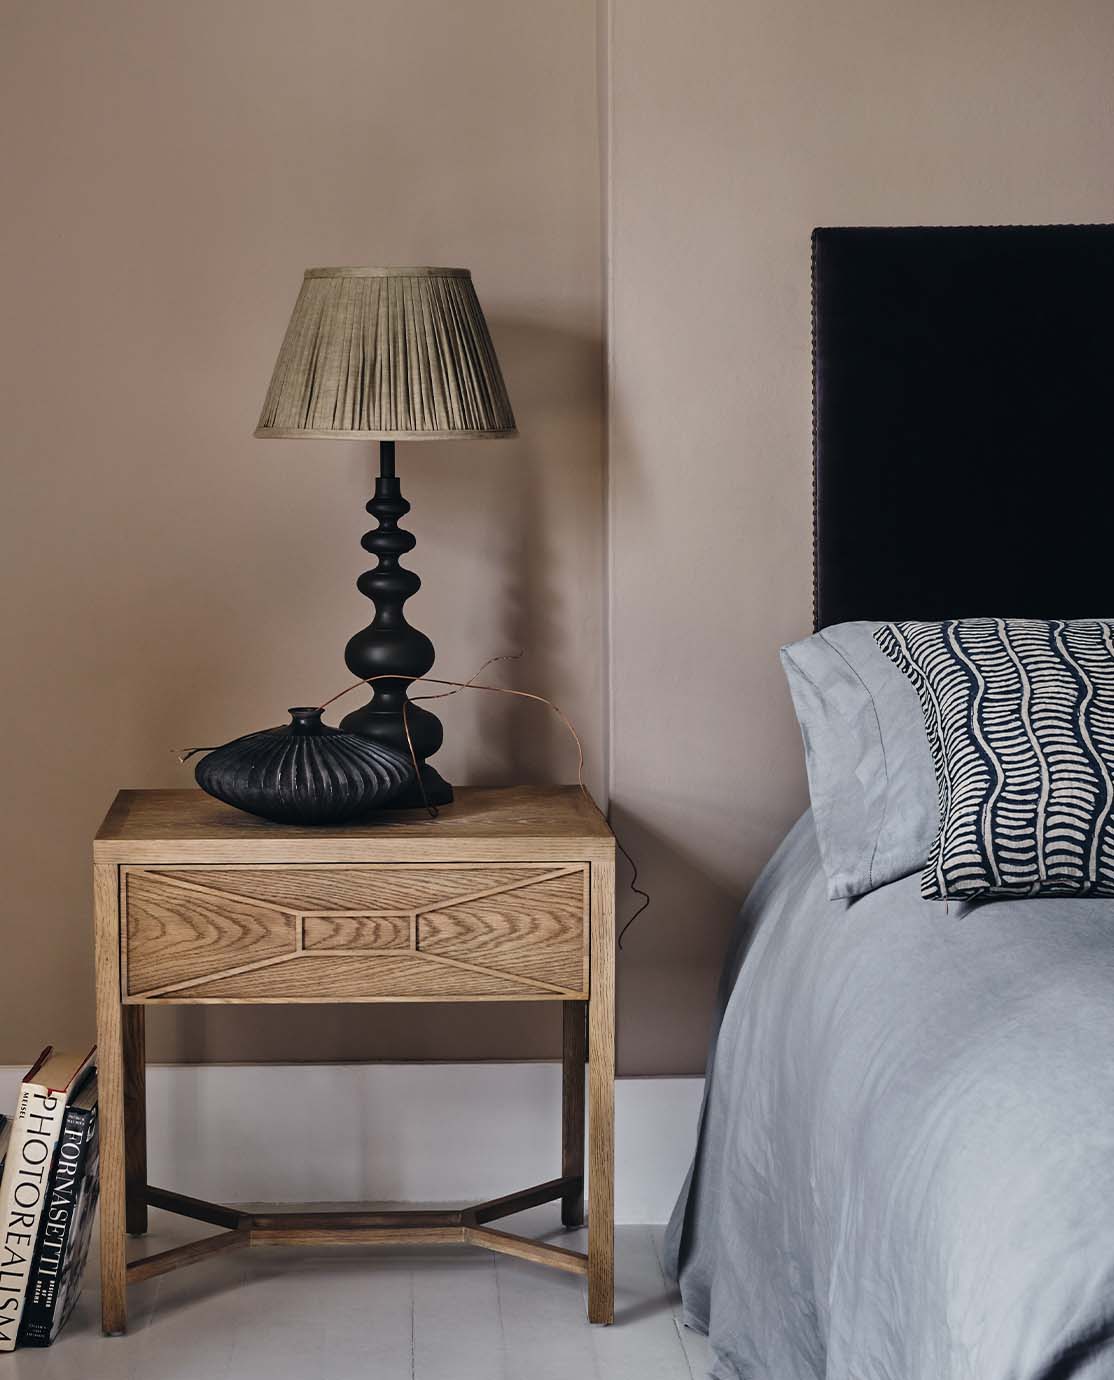 A black, sculptural lamp with a curvy base and grey pleated lampshade sits ona. wooden nightstand.